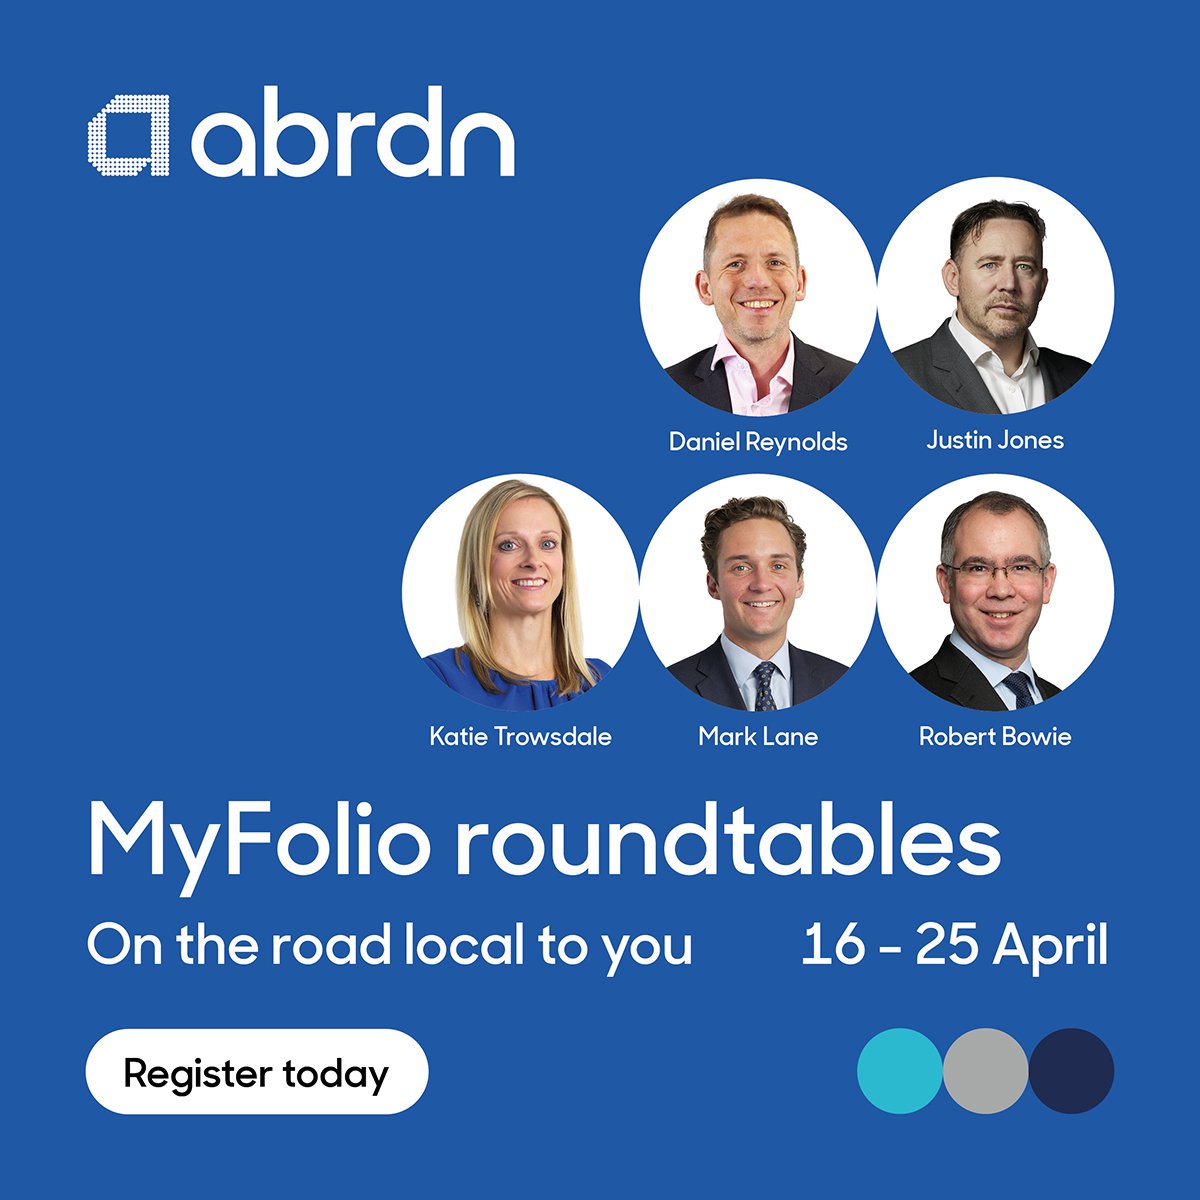 Join our #MyFolio roundtables (16-25 April) for insights in the tailored ranges. UK professional investors only. Capital at risk. Register here. ow.ly/qv8z50R3p4u